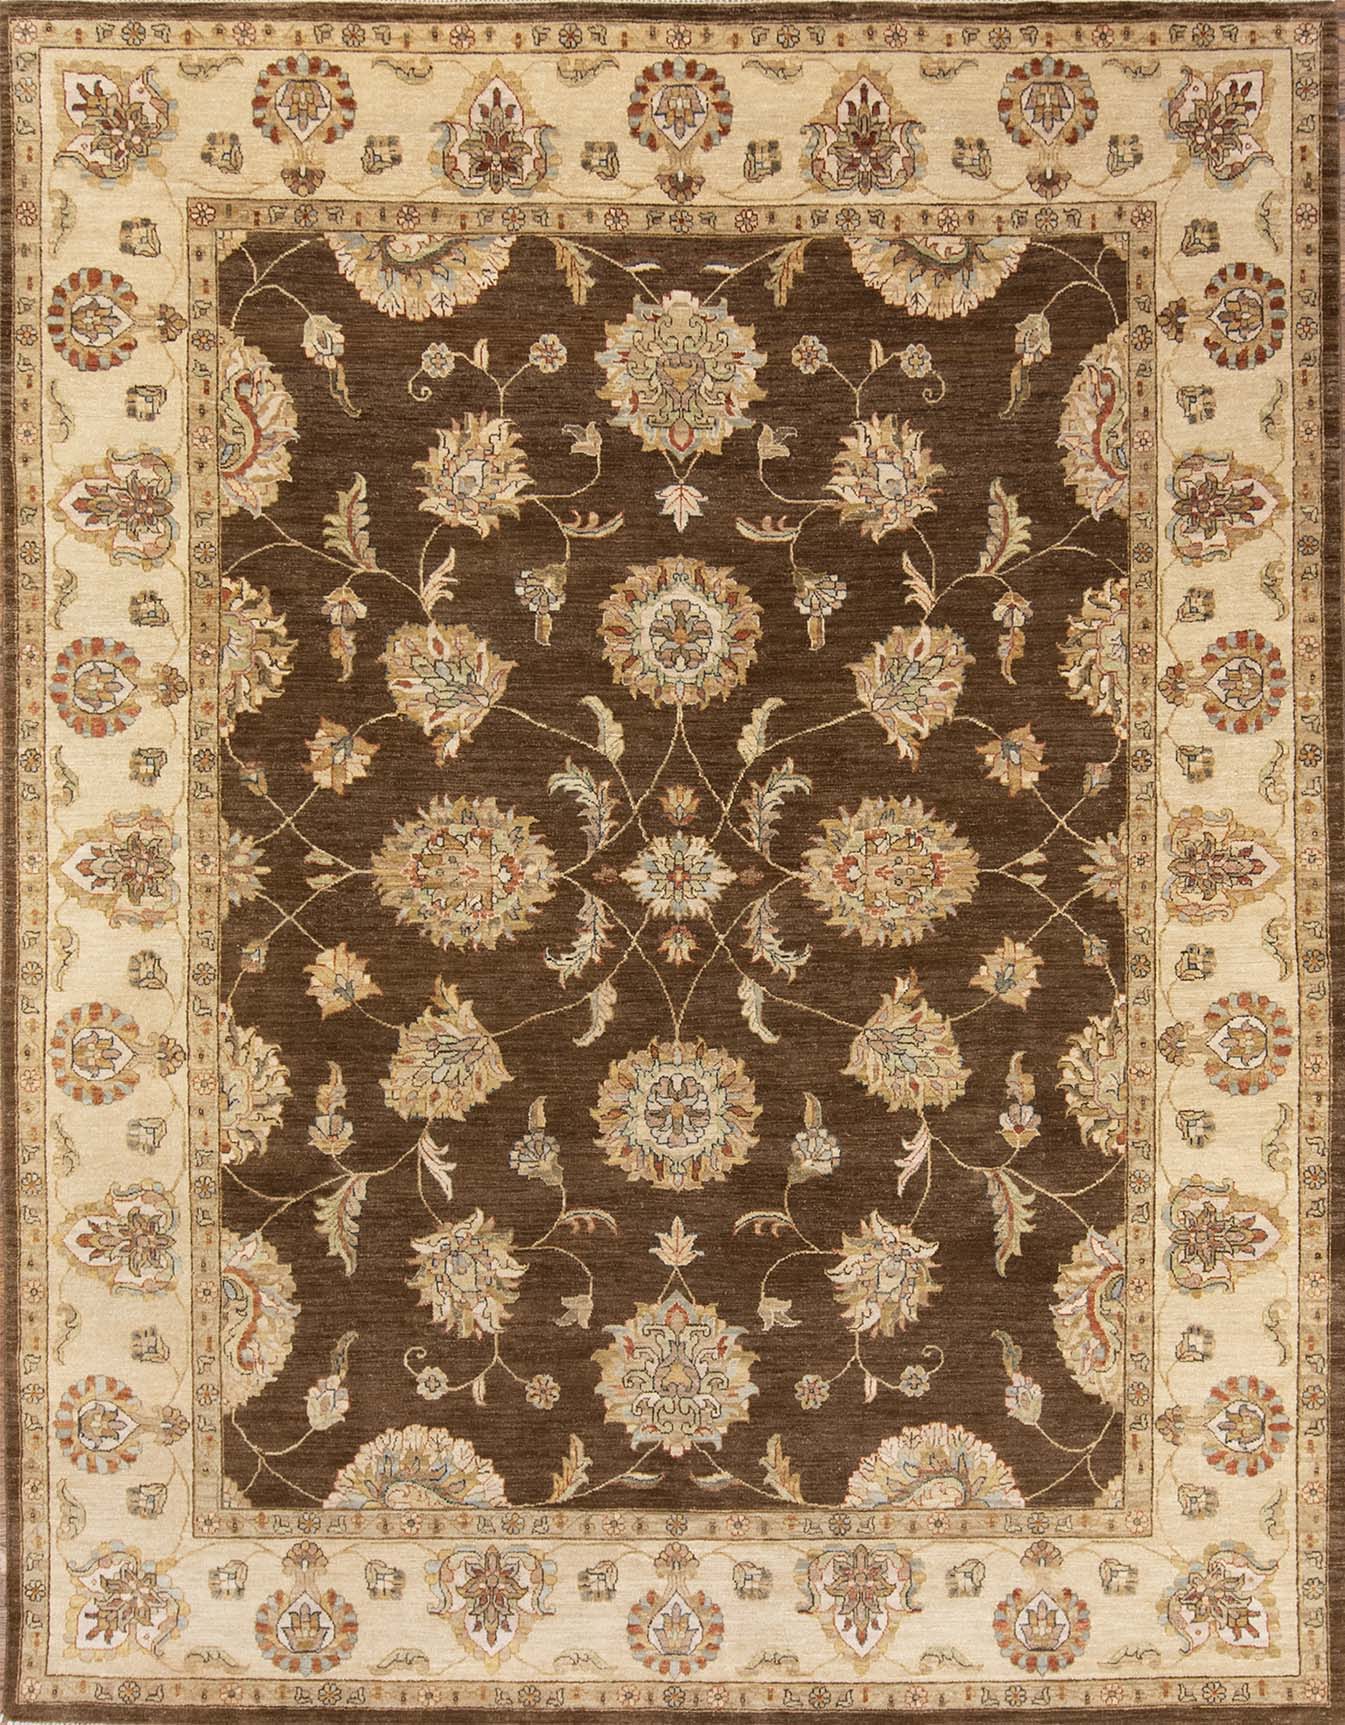 Hand knotted wool transitional area rug with taupe and earth tone colors. Size 8x10.3.